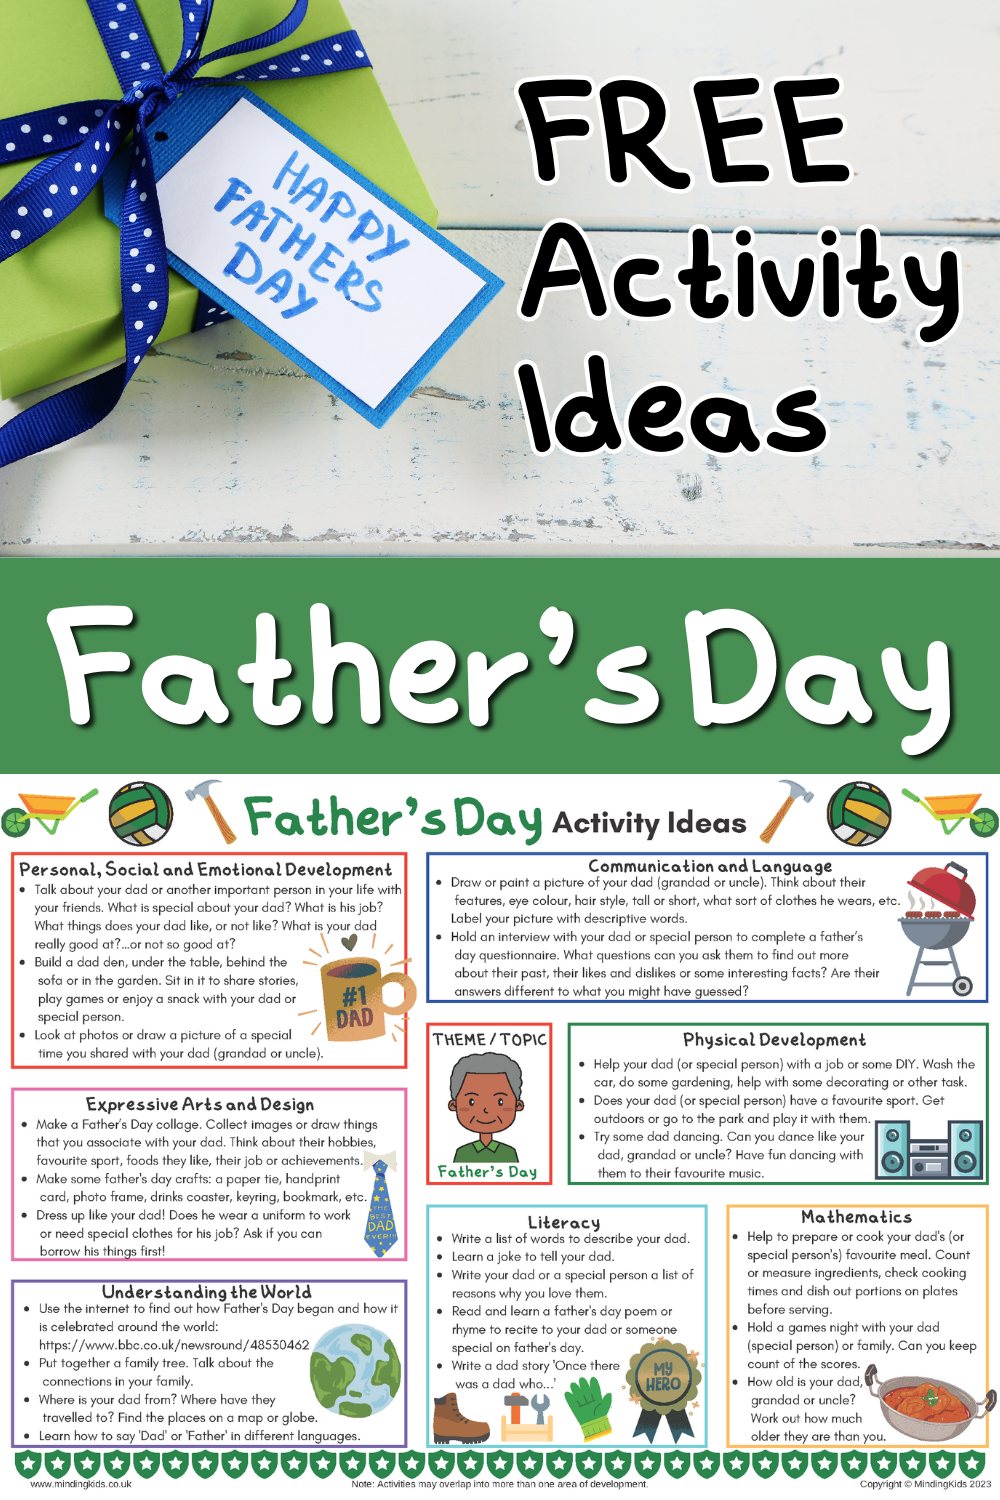 Father's Day Activity Ideas - PINTEREST